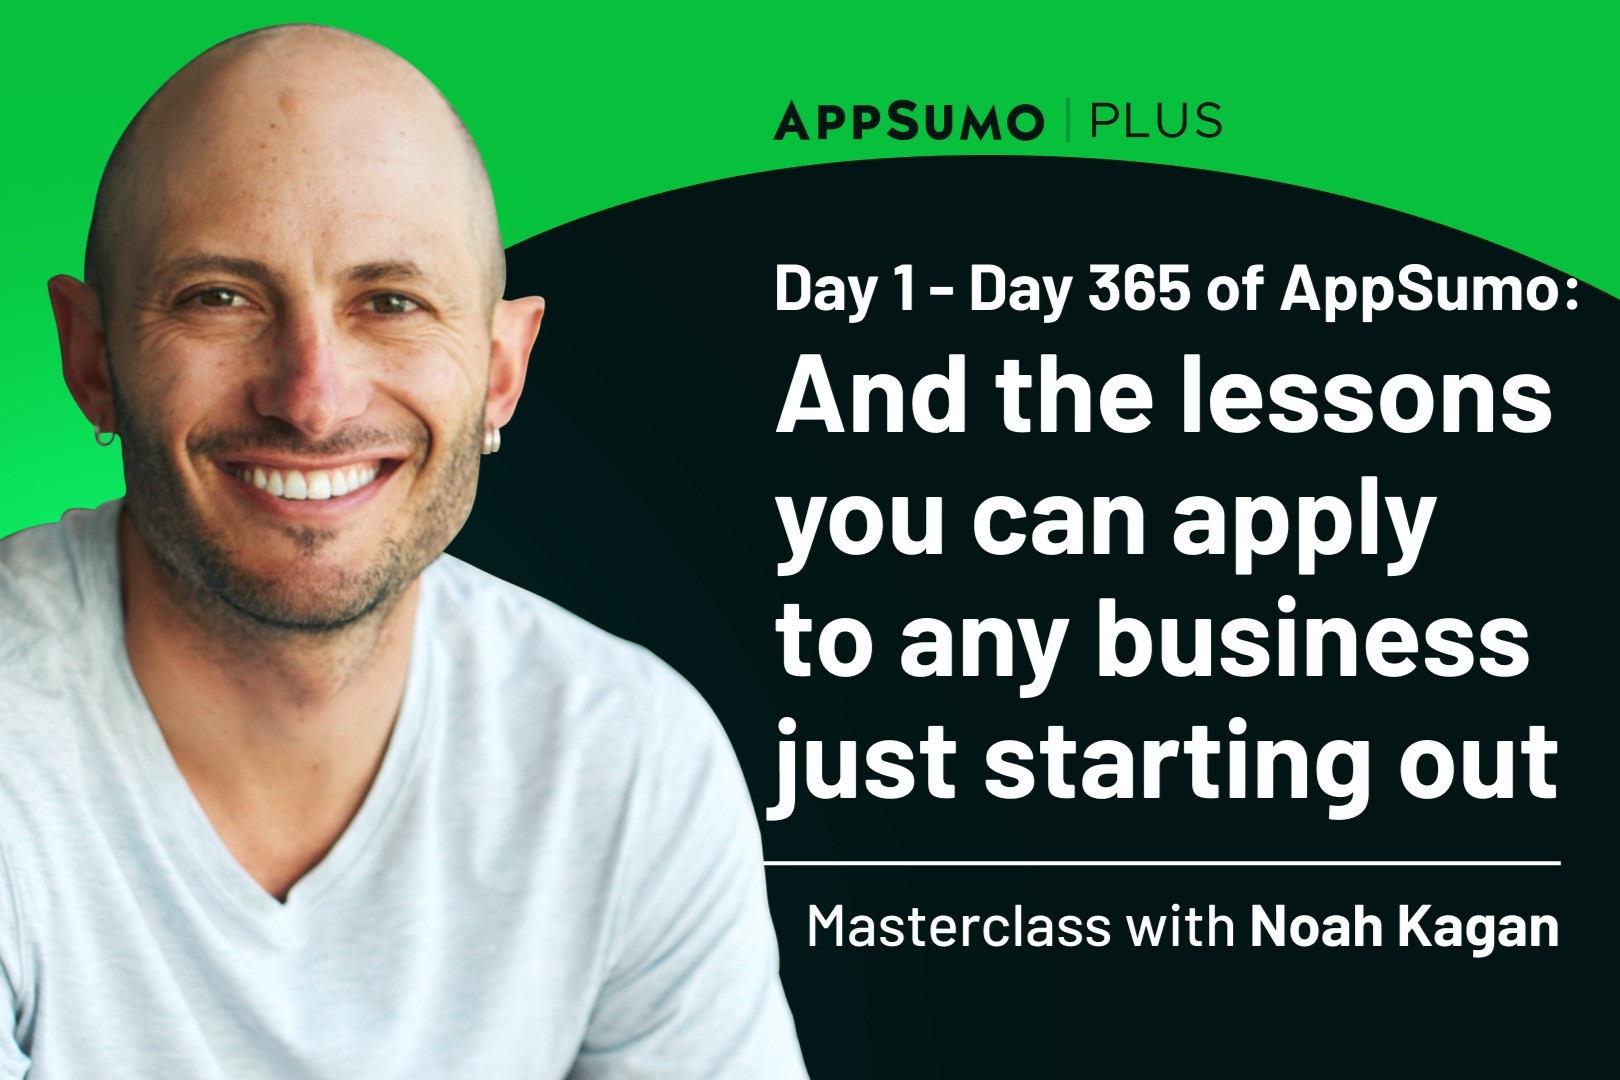 AppSumo Deal for Masterclass: Day 1 - Day 365 of AppSumo – Plus exclusive